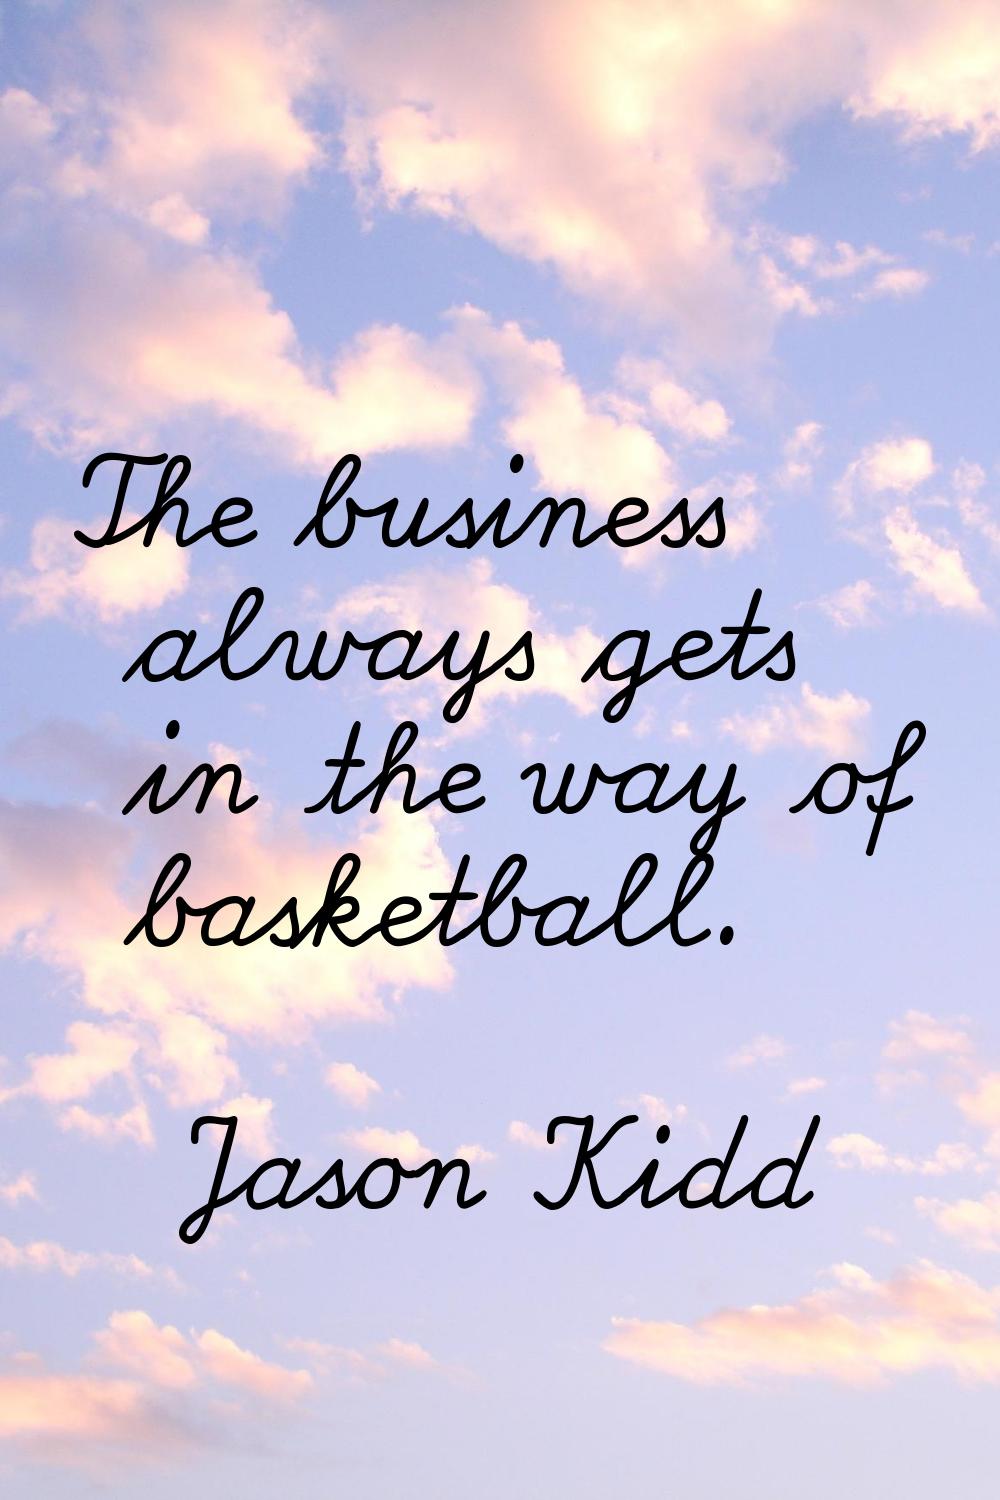 The business always gets in the way of basketball.